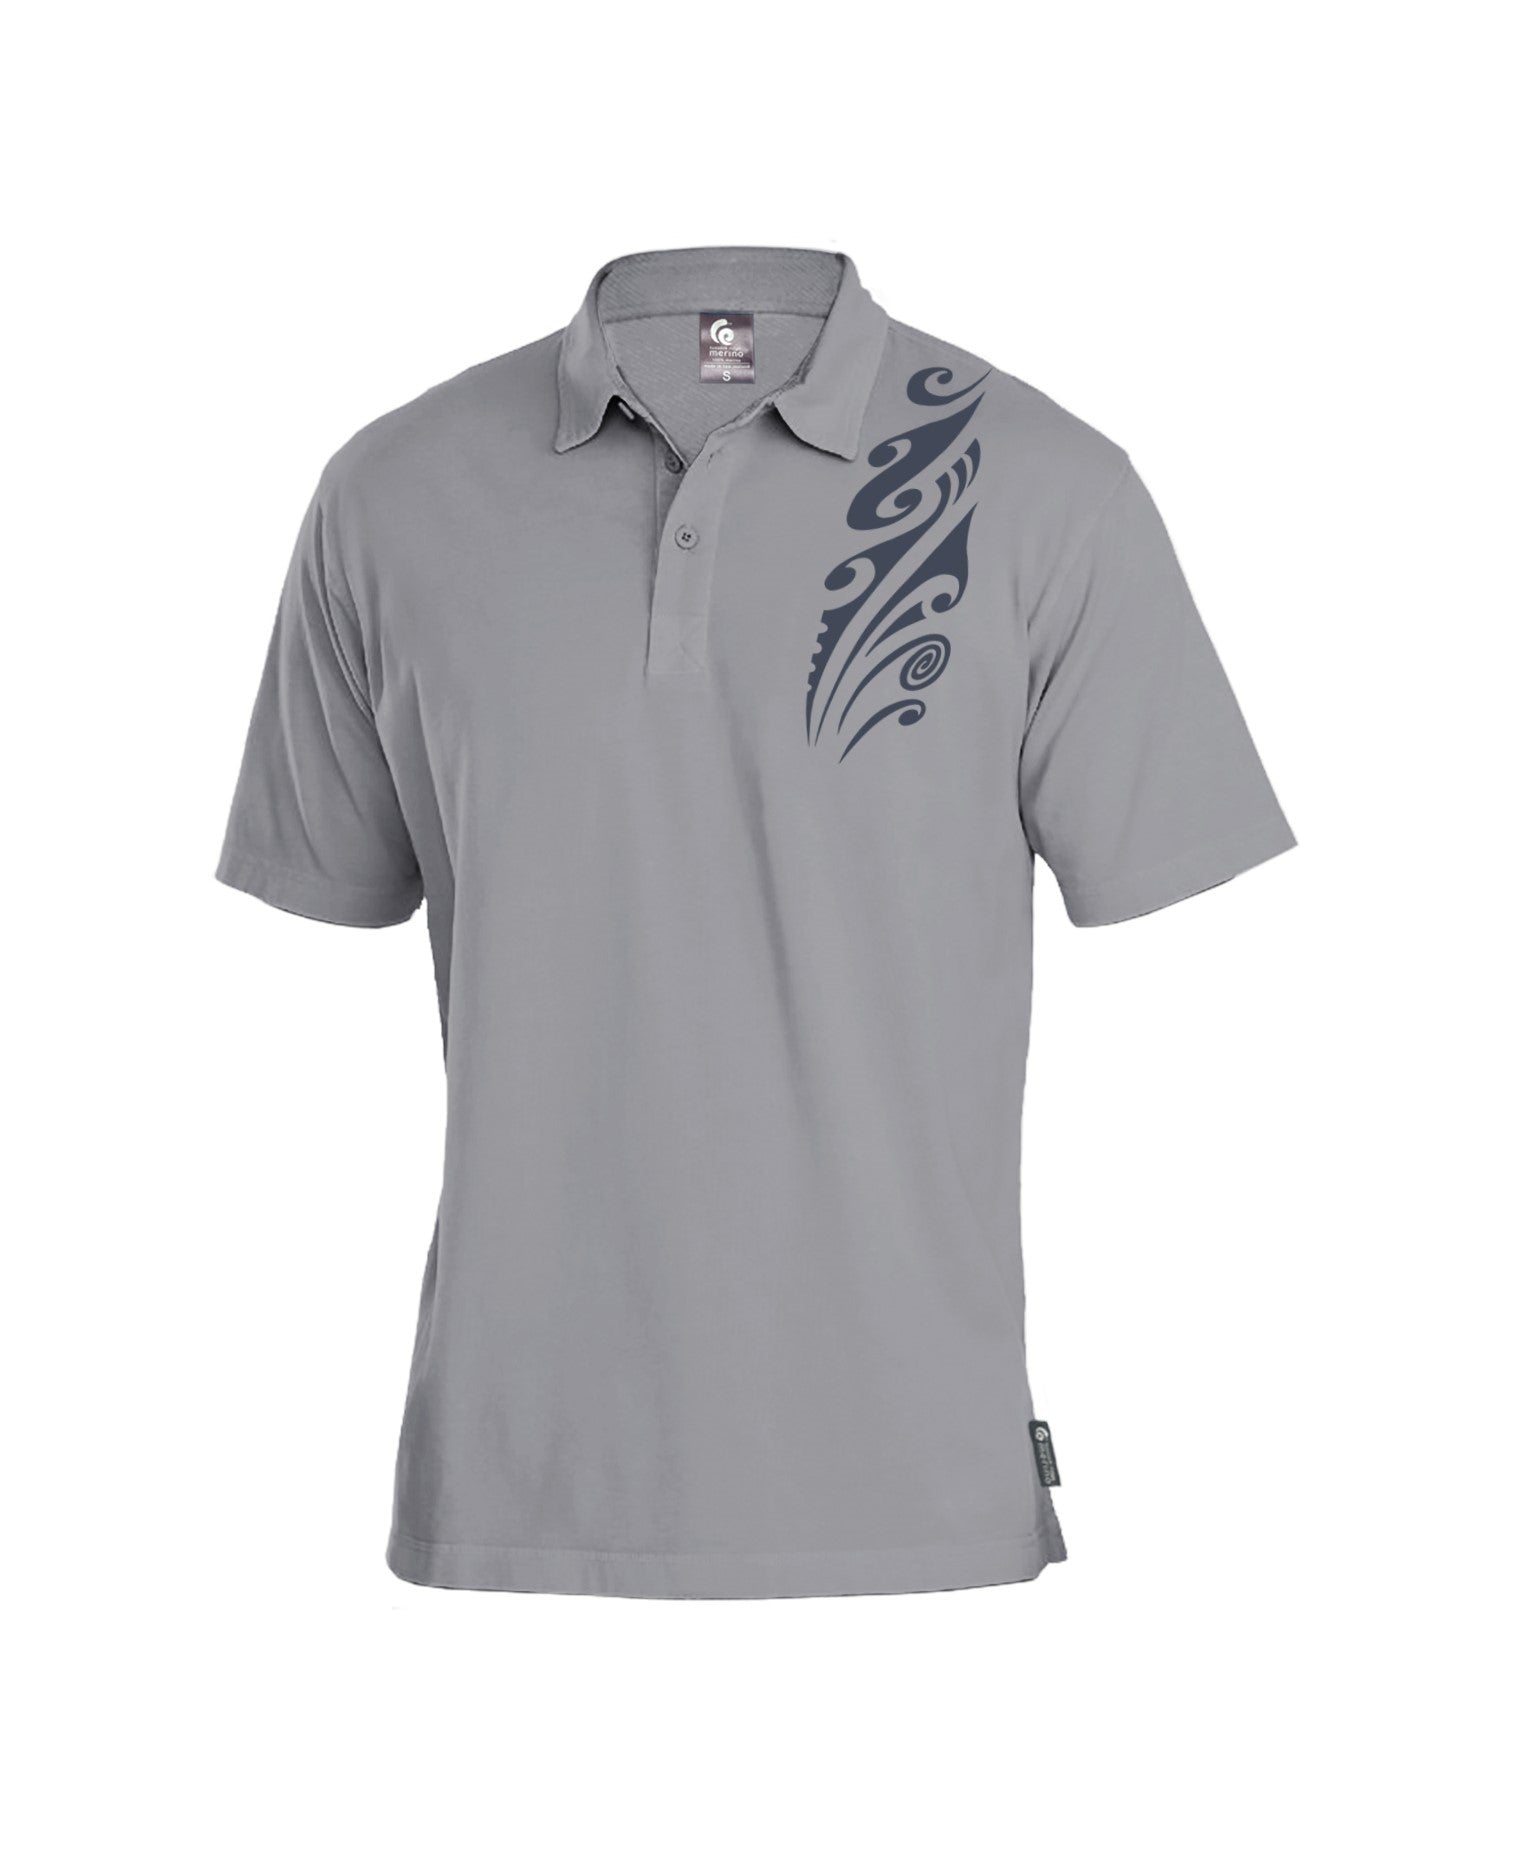 Merino Men's Silver Polo With Print. Made in New Zealand.